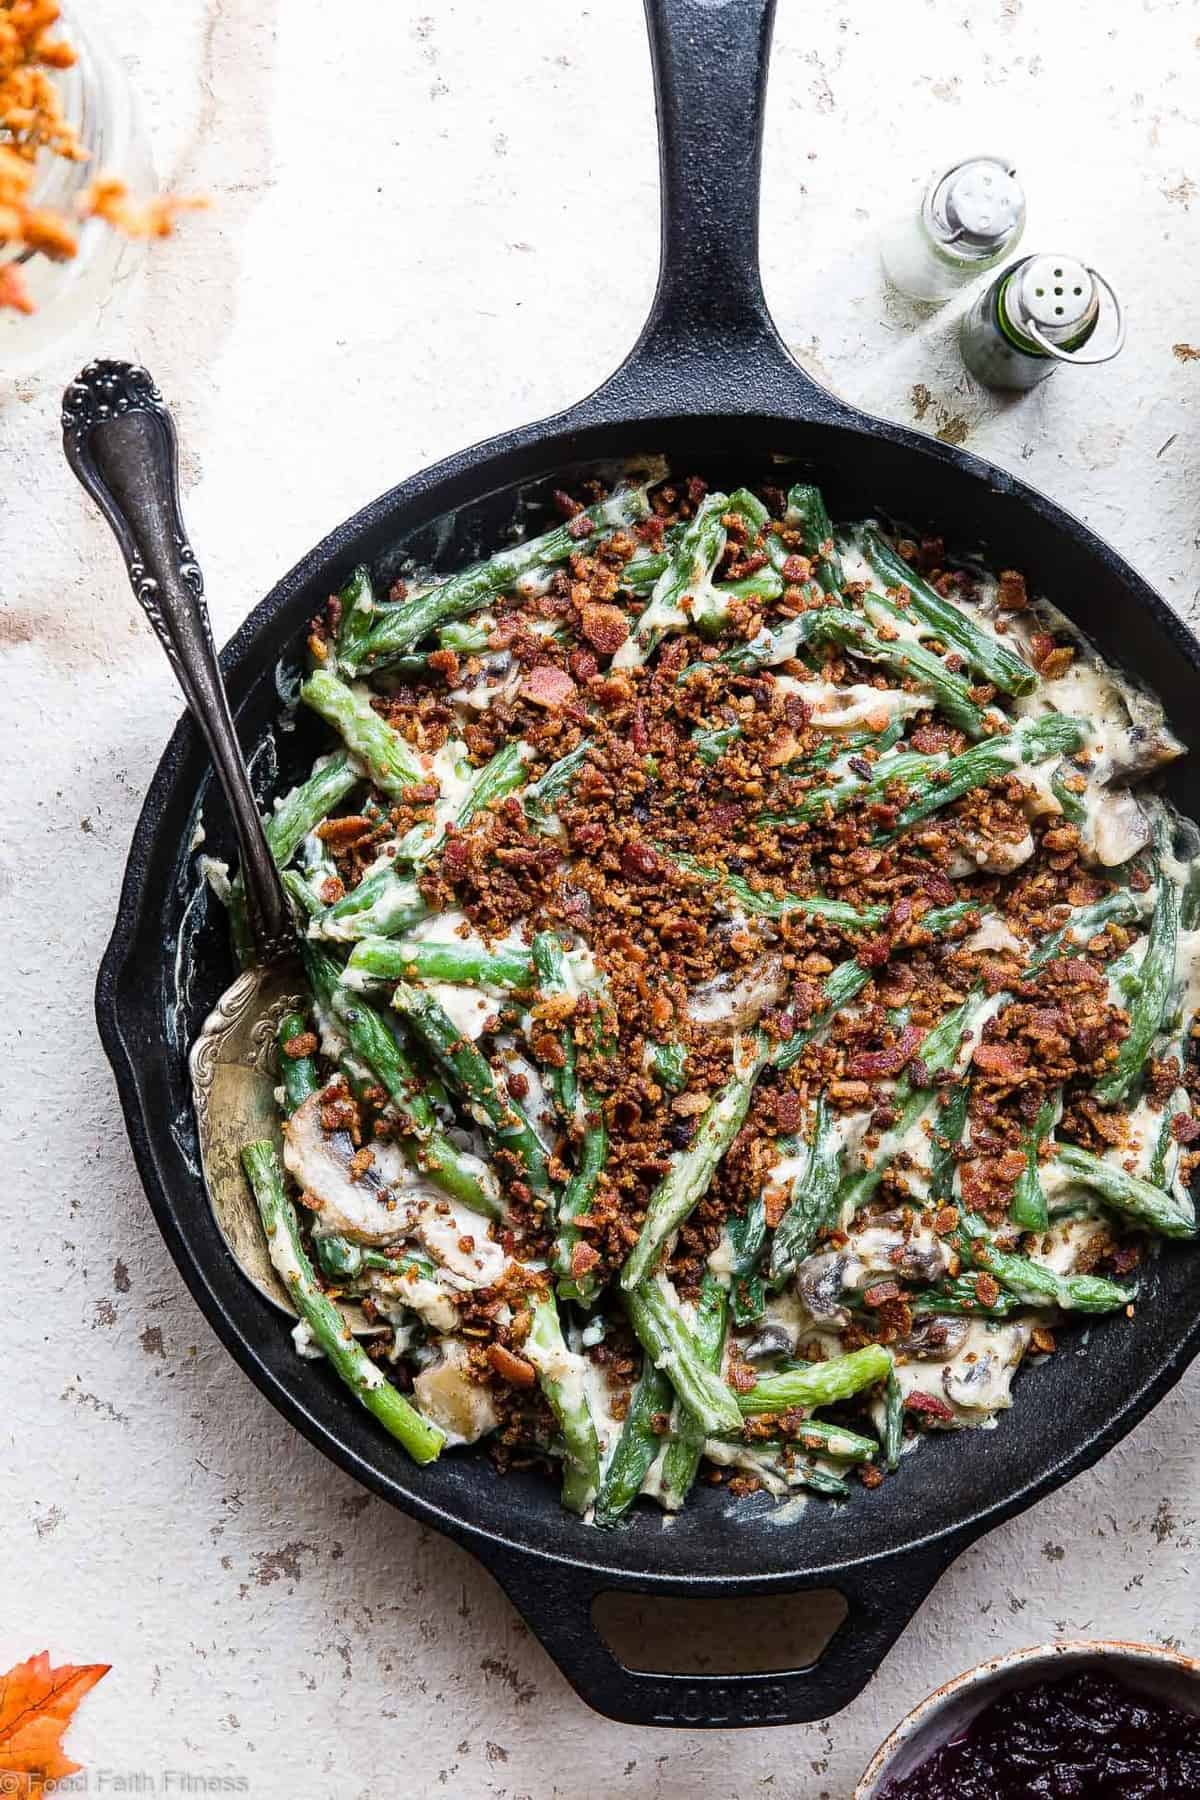 Low Carb Keto Green Bean Casserole - This Low Carb Green Bean Casserole is an EASY, healthy remake of the classic side! No one will know it's better for you! Dairy free option included! | #Foodfaithfitness | #Glutenfree #Dairyfree #Keto #Lowcarb #Healthy